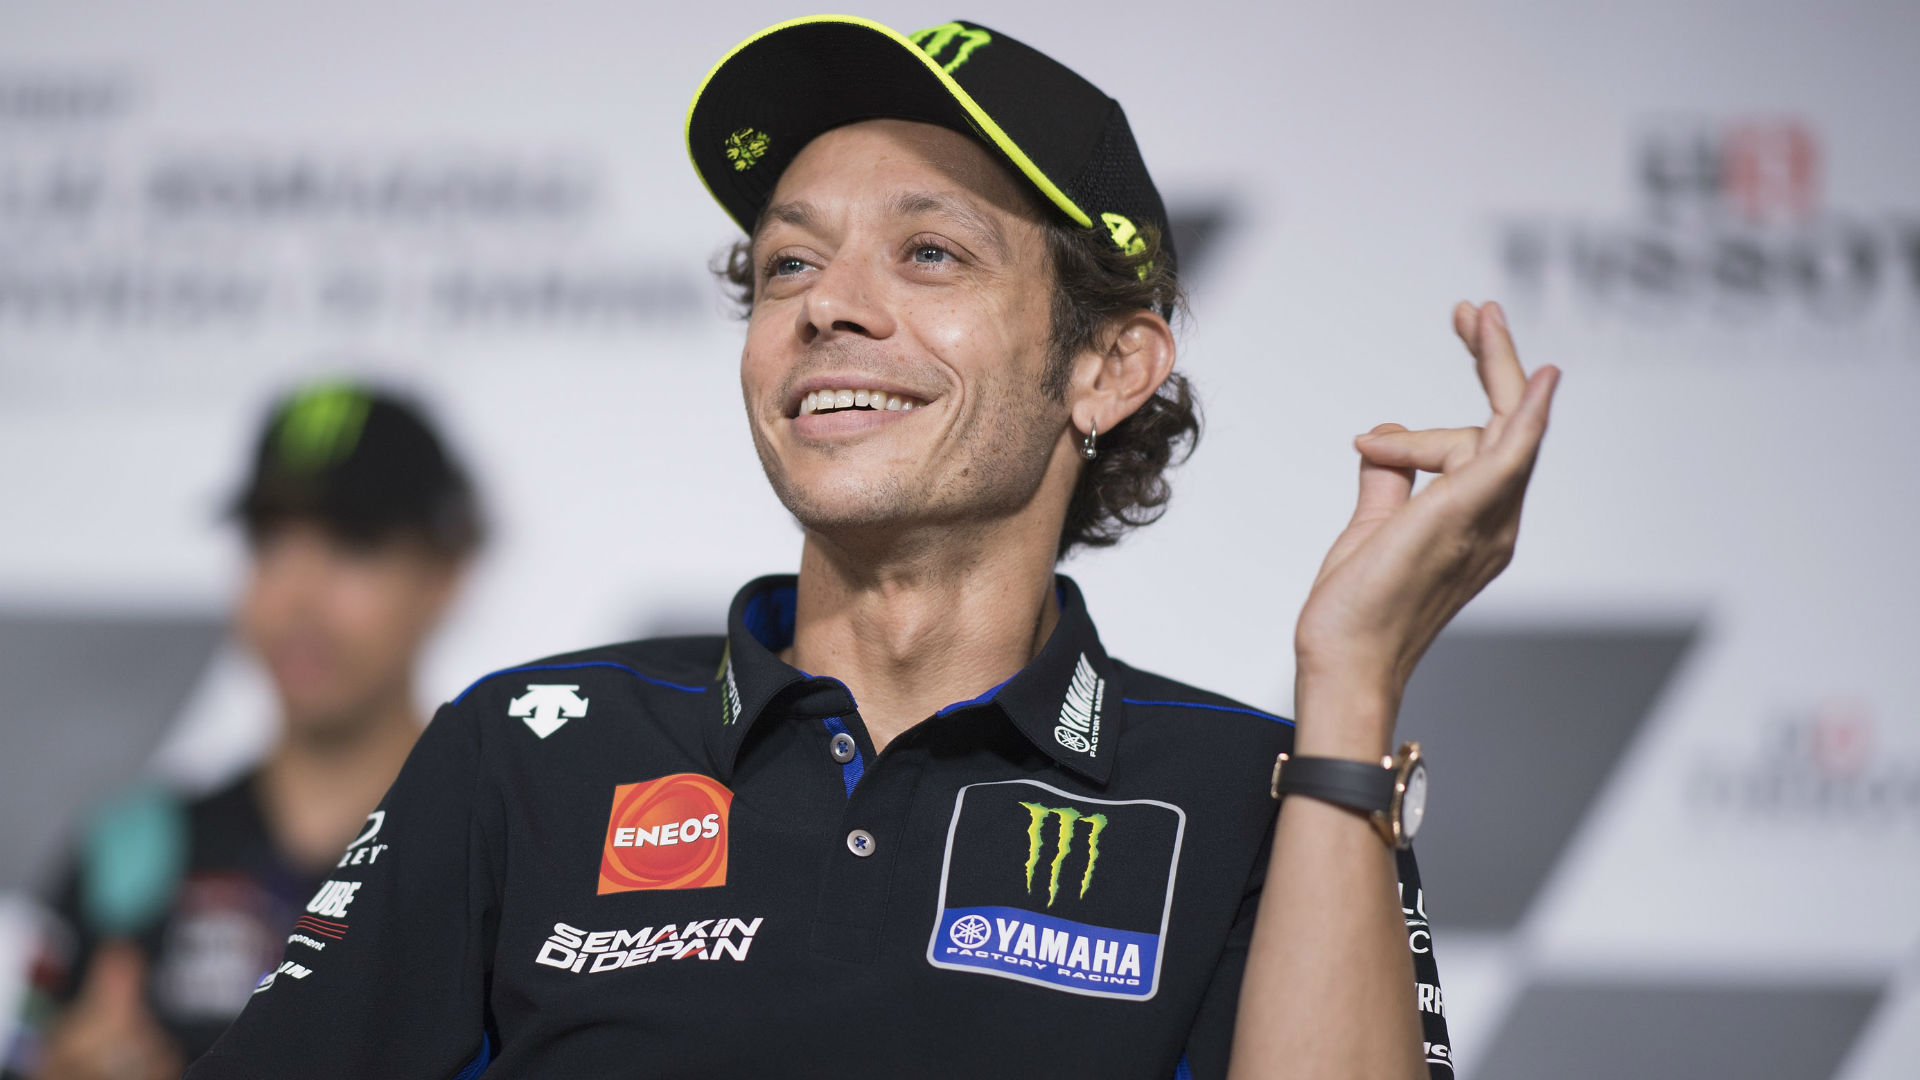 Petronas Yamaha finally made it official on Saturday: Valentino Rossi will ride for them in the 2021 MotoGP season.